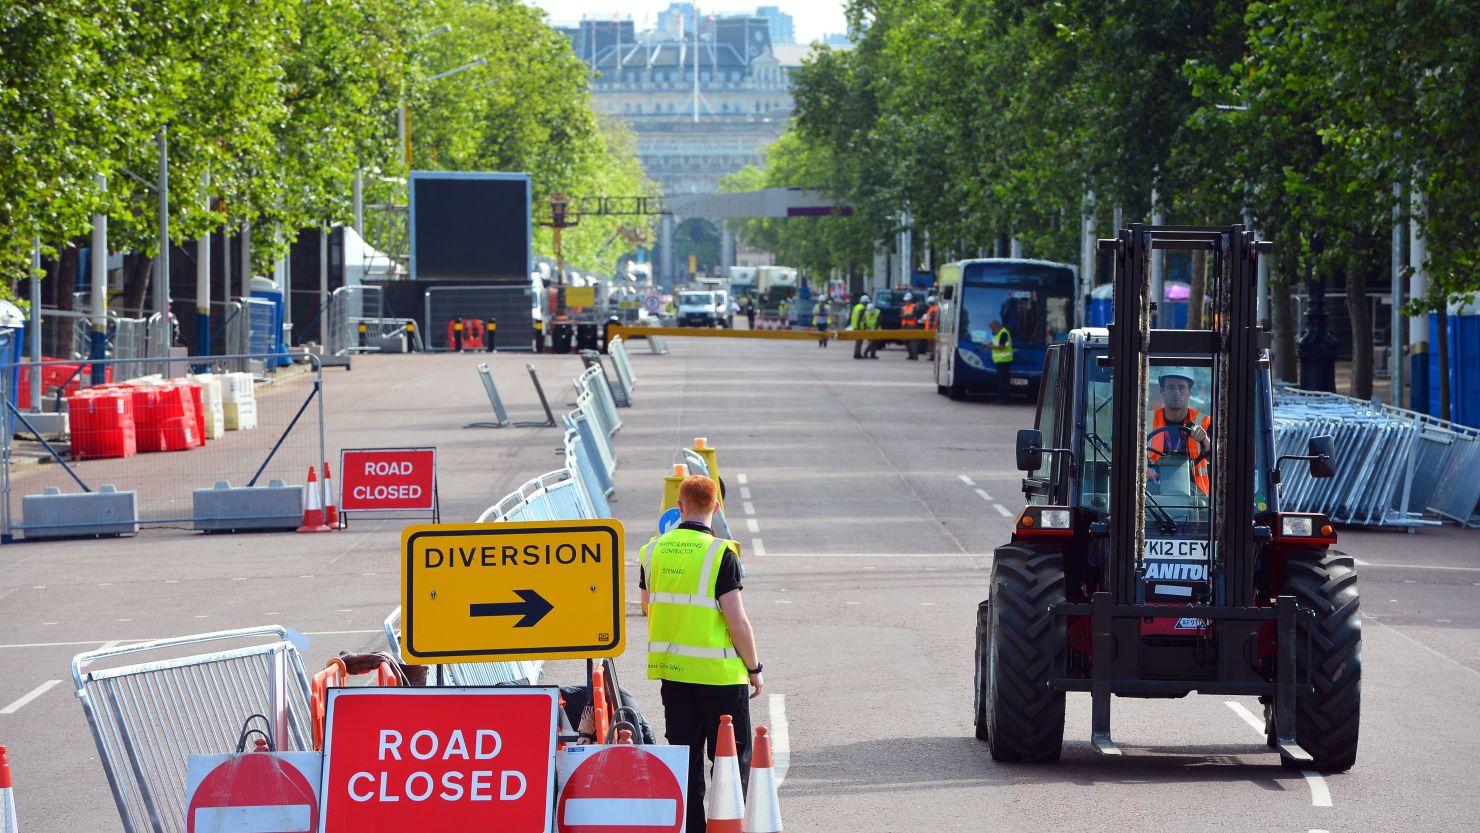 Workers put final touches on the Mall near Buckingham Palace. The Mall closes to traffic during the Games, irritating many Britons.